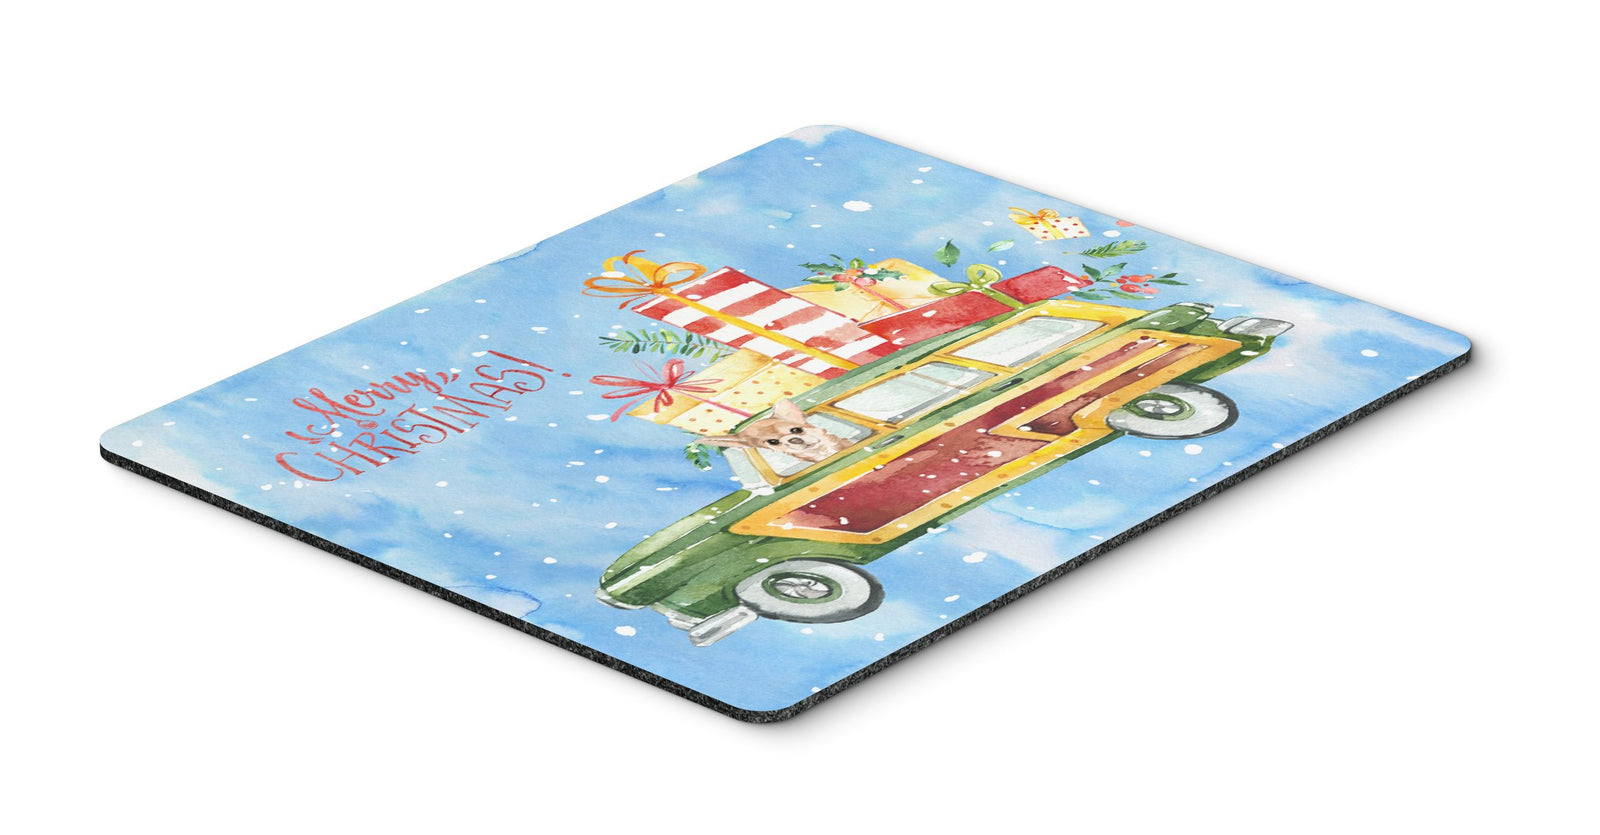 Merry Christmas Chihuahua Mouse Pad, Hot Pad or Trivet CK2449MP by Caroline's Treasures